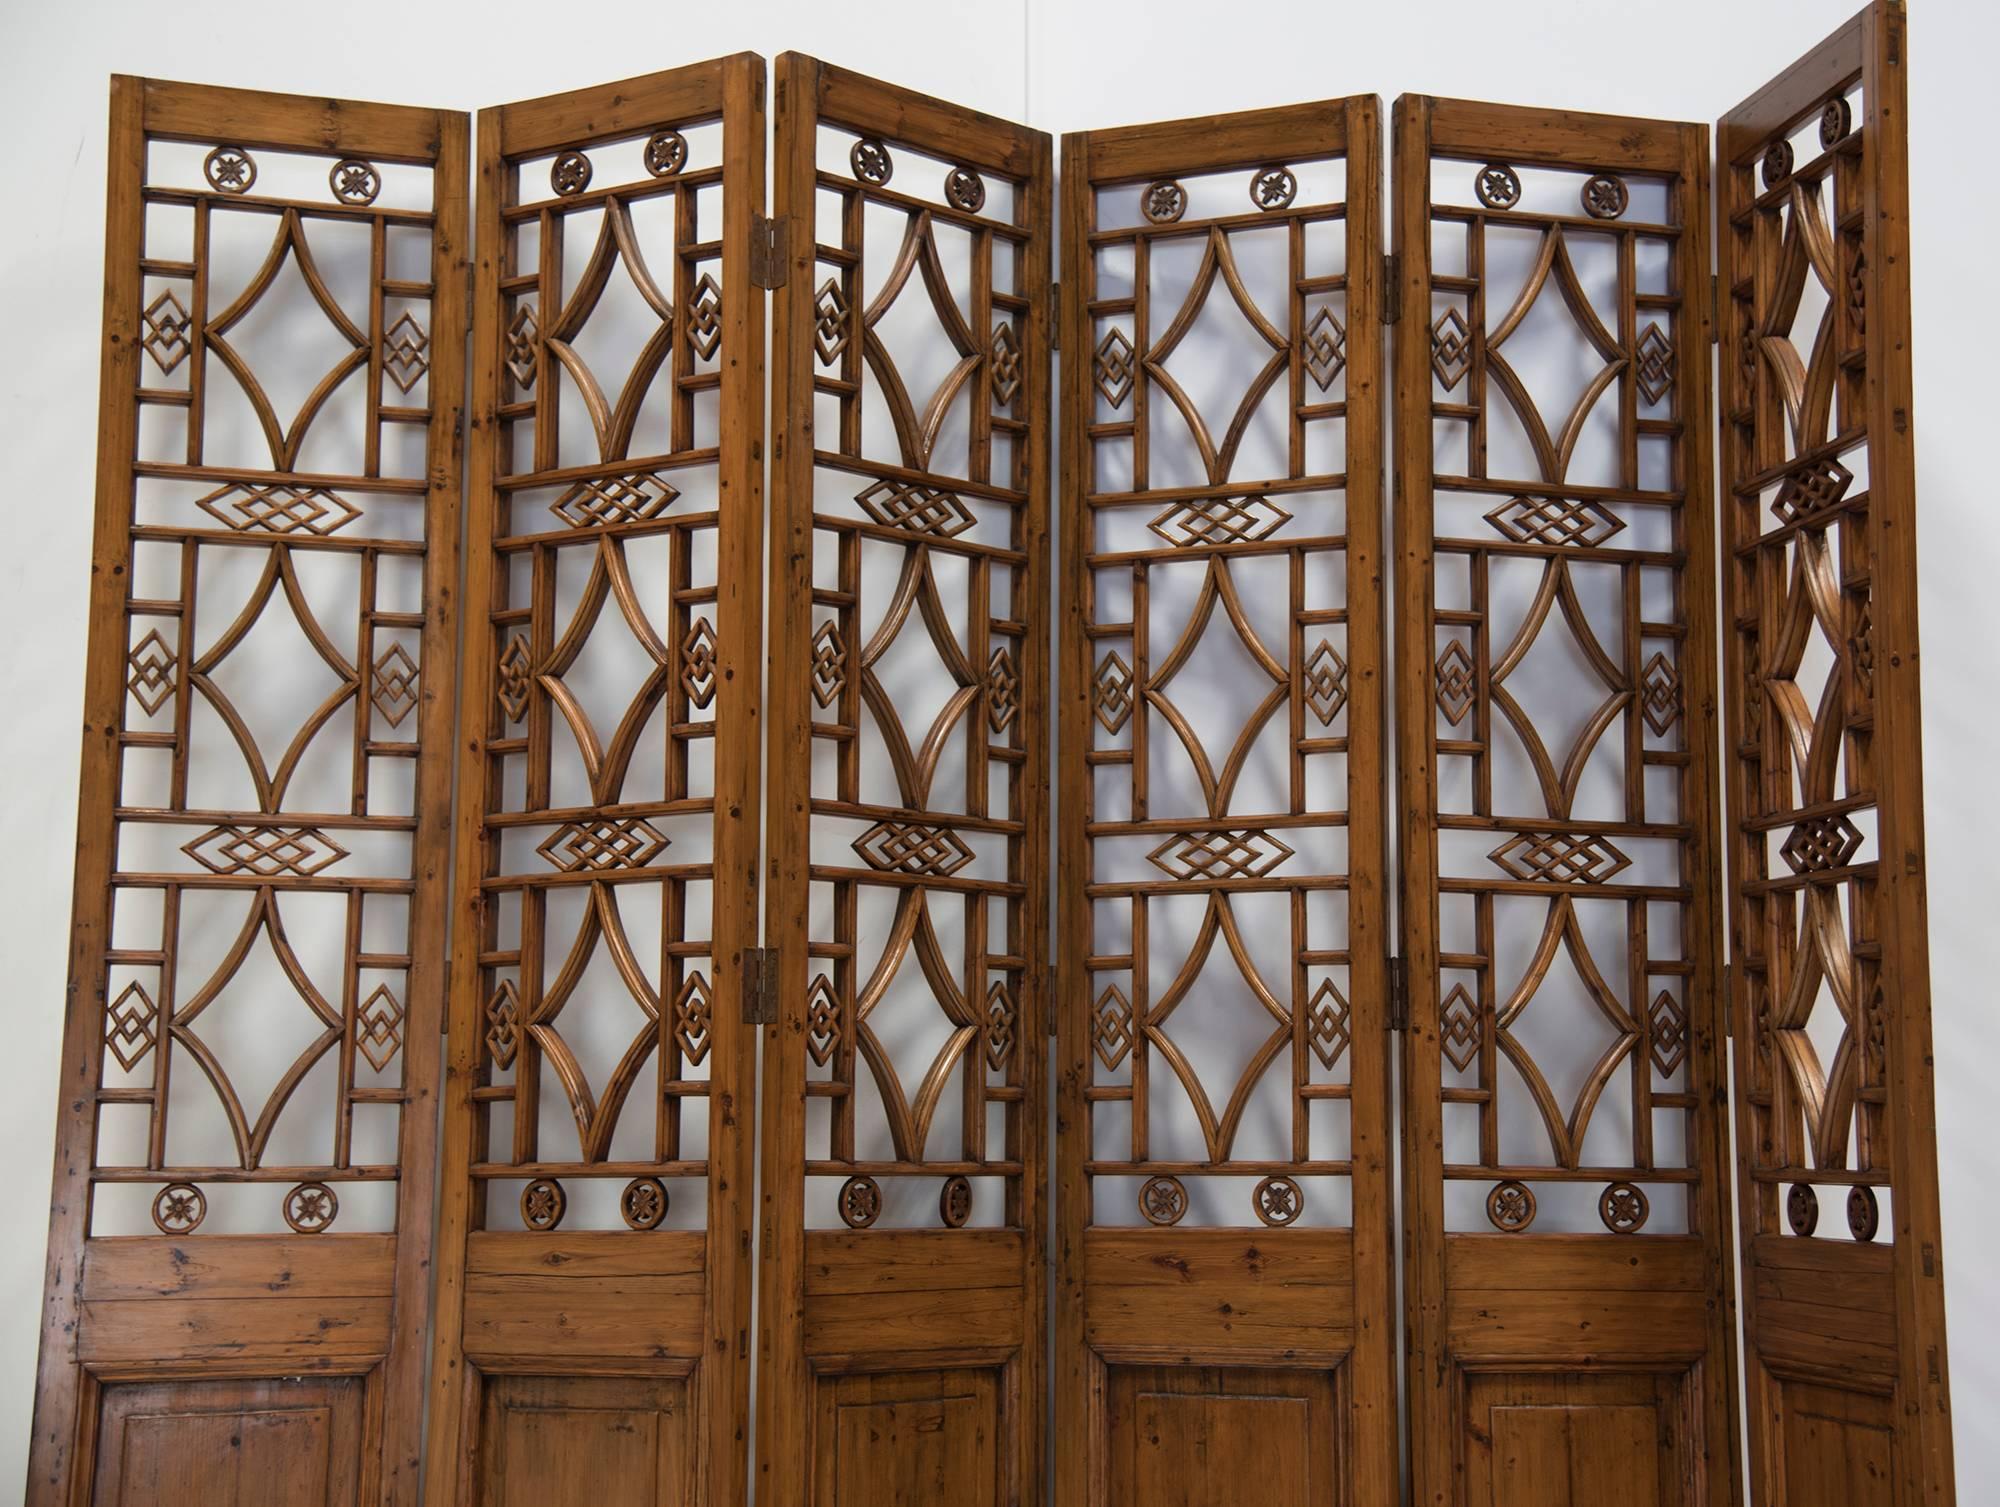 An early 20th century Chinese framed lattice-work six-panel screen with upper sections in openwork geometric motif. An exquisite design in pristine condition will work wonders for any large room of your home. Panels are easily arranged and hinges